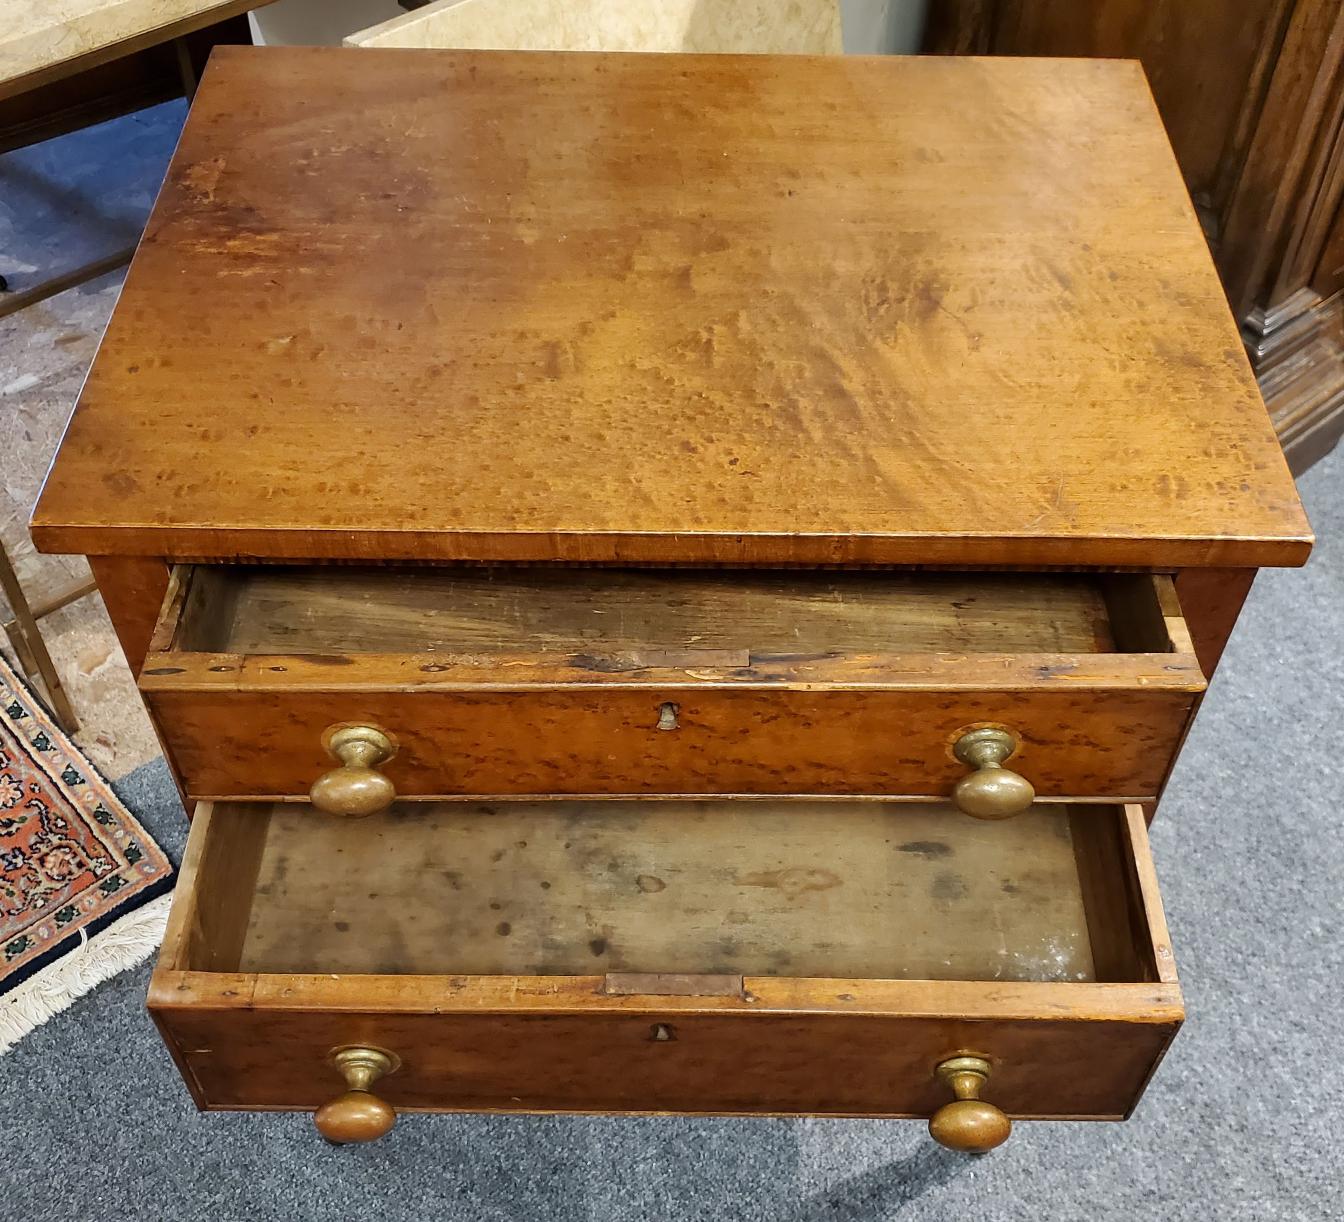 Mid 19th Century New England Birdseye Maple Side Table with Two Drawers In Good Condition For Sale In Middleburg, VA